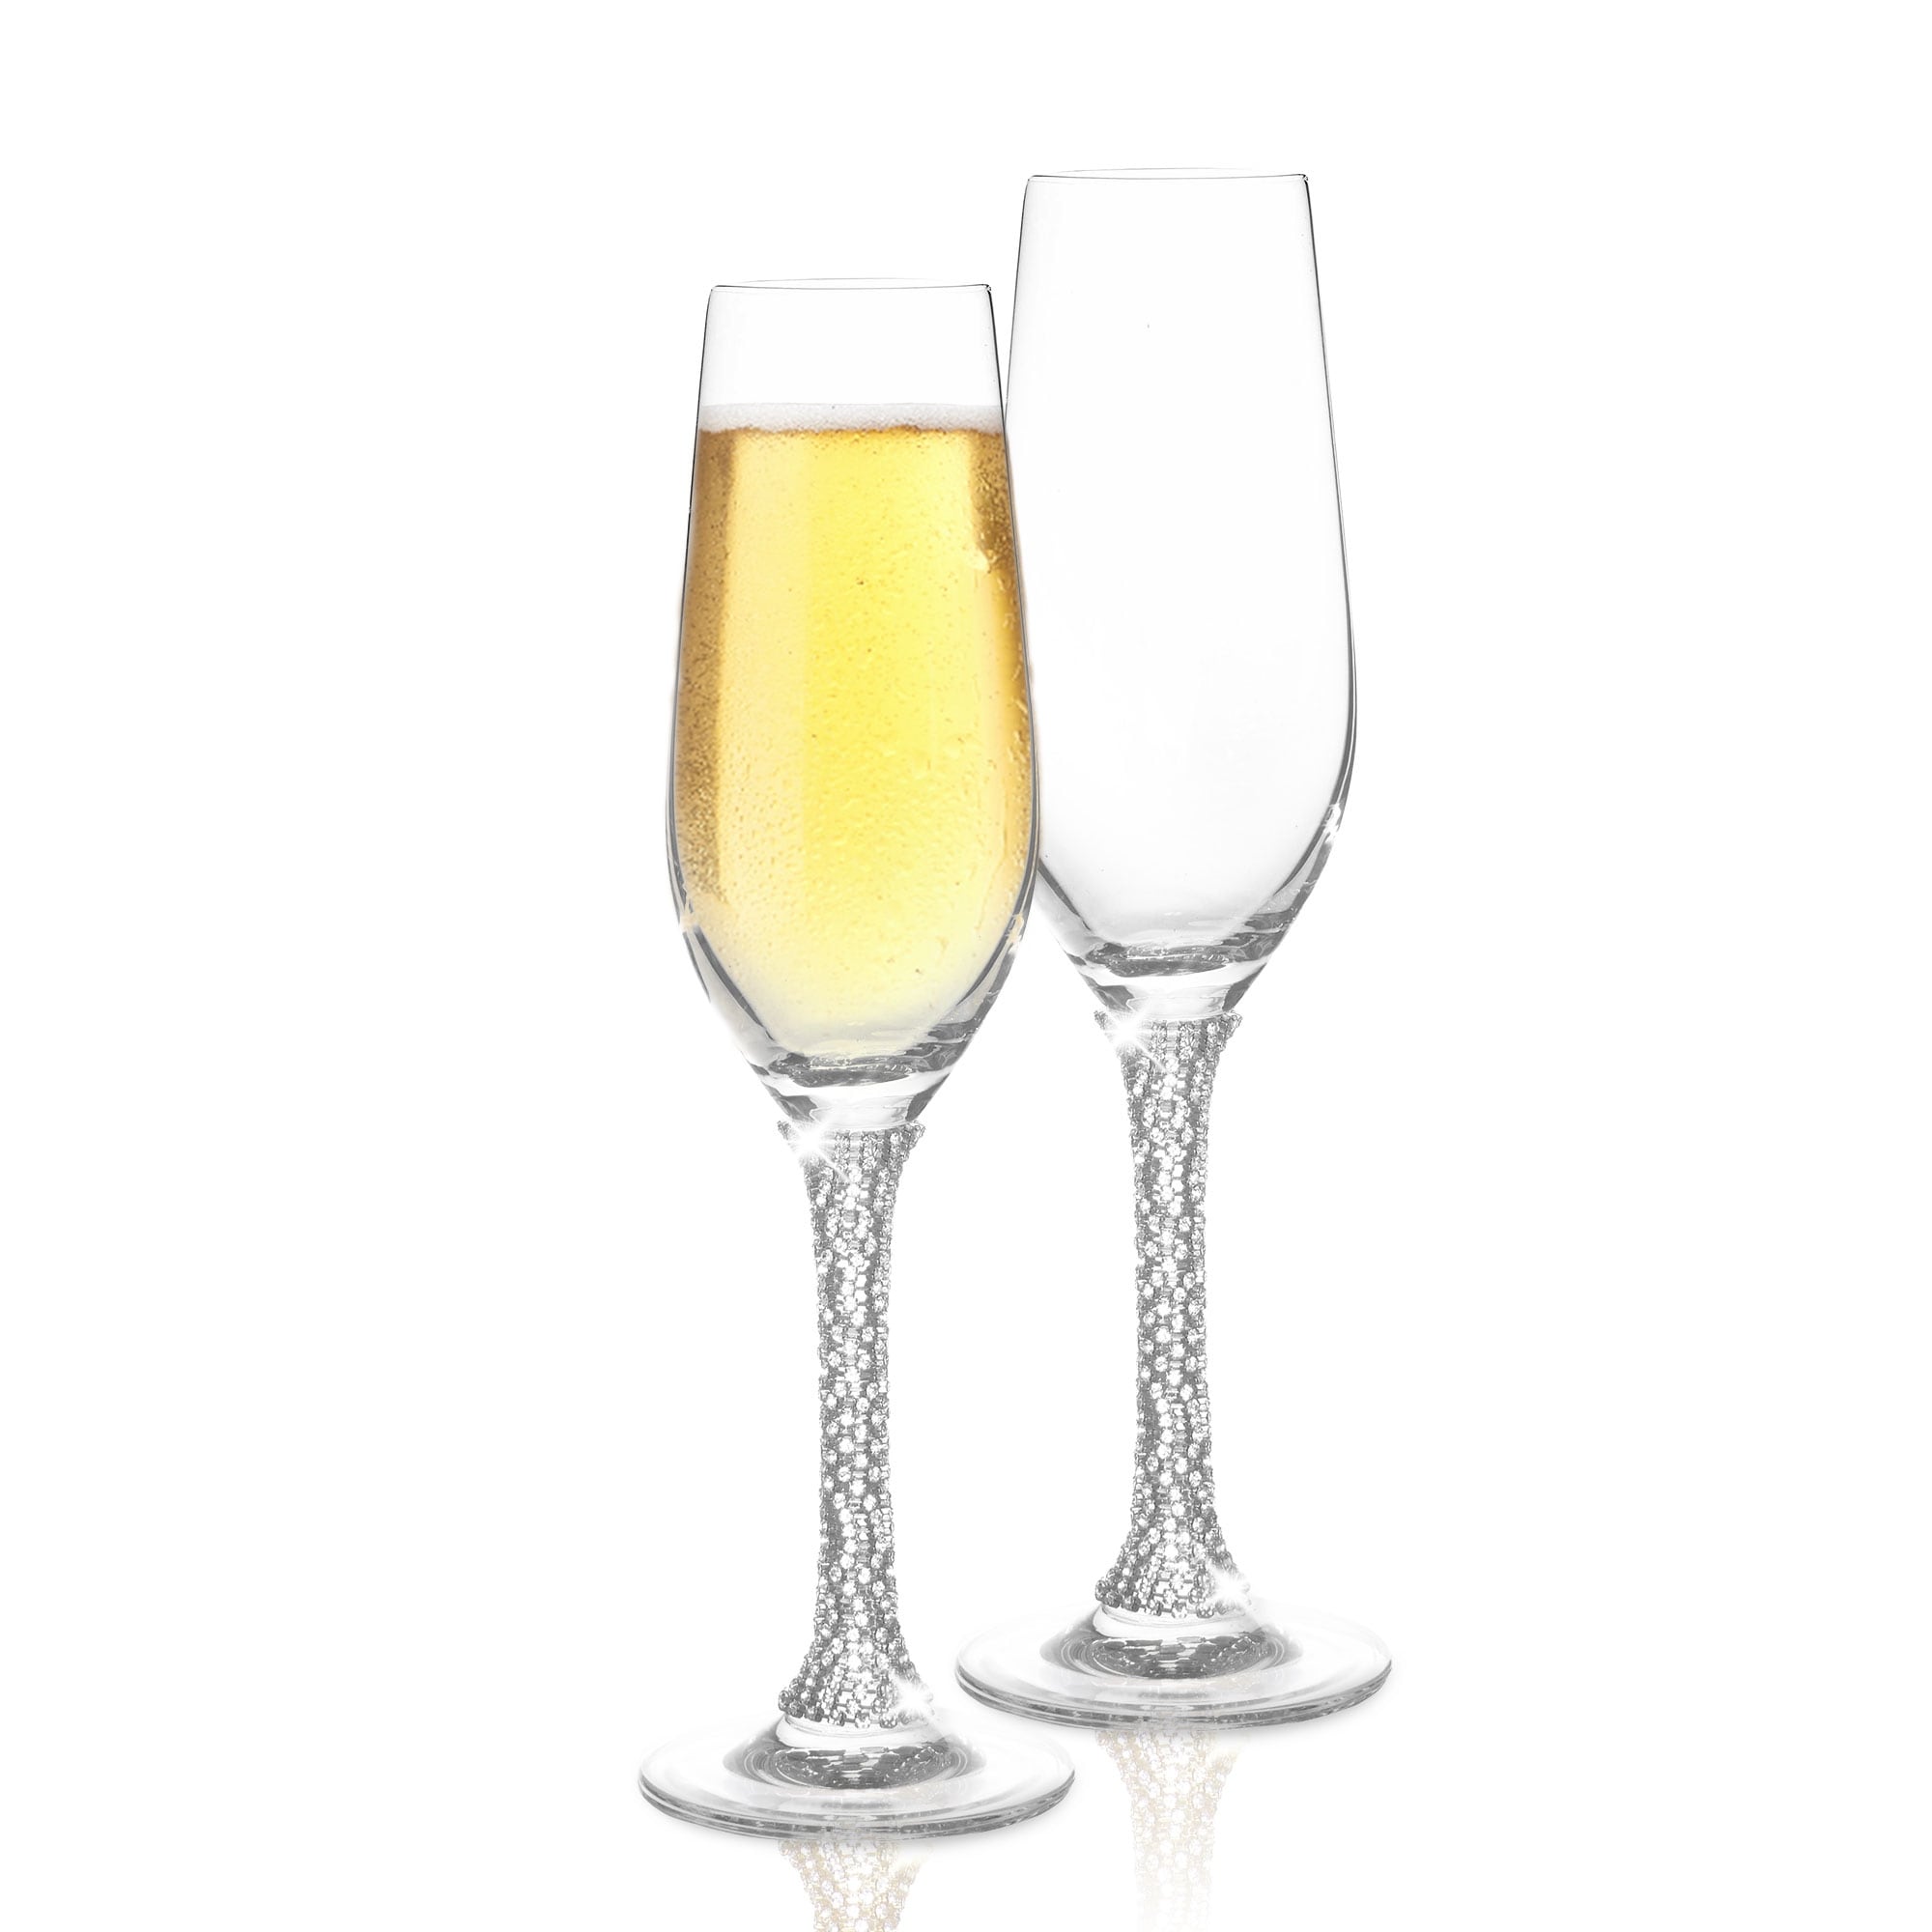 https://ak1.ostkcdn.com/images/products/is/images/direct/c794d8b58bf0acfd1f84101d90689a2752d9adbf/Berkware-Crystal-Champagne-Glasses-with-Gold-or-Silver-Stem.jpg